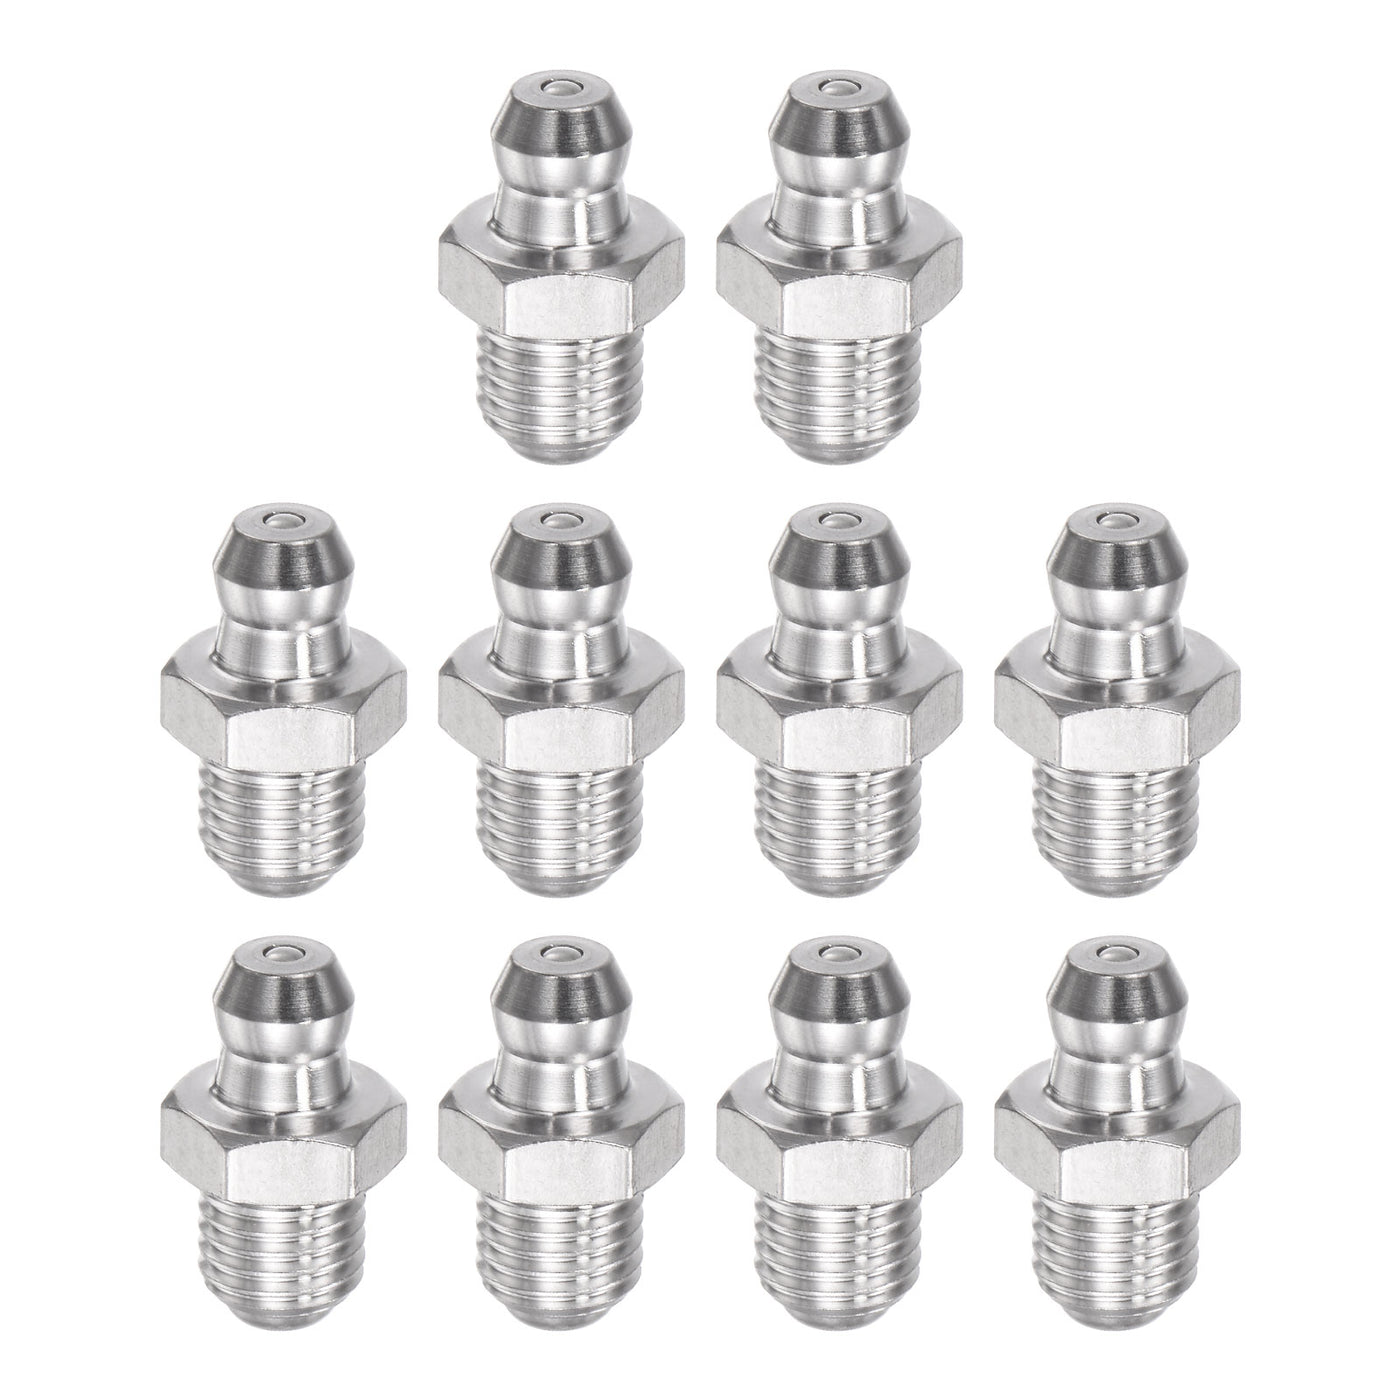 Uxcell Uxcell 304 Stainless Steel Straight Hydraulic Grease Fitting M6 x 1mm Thread, 10Pcs